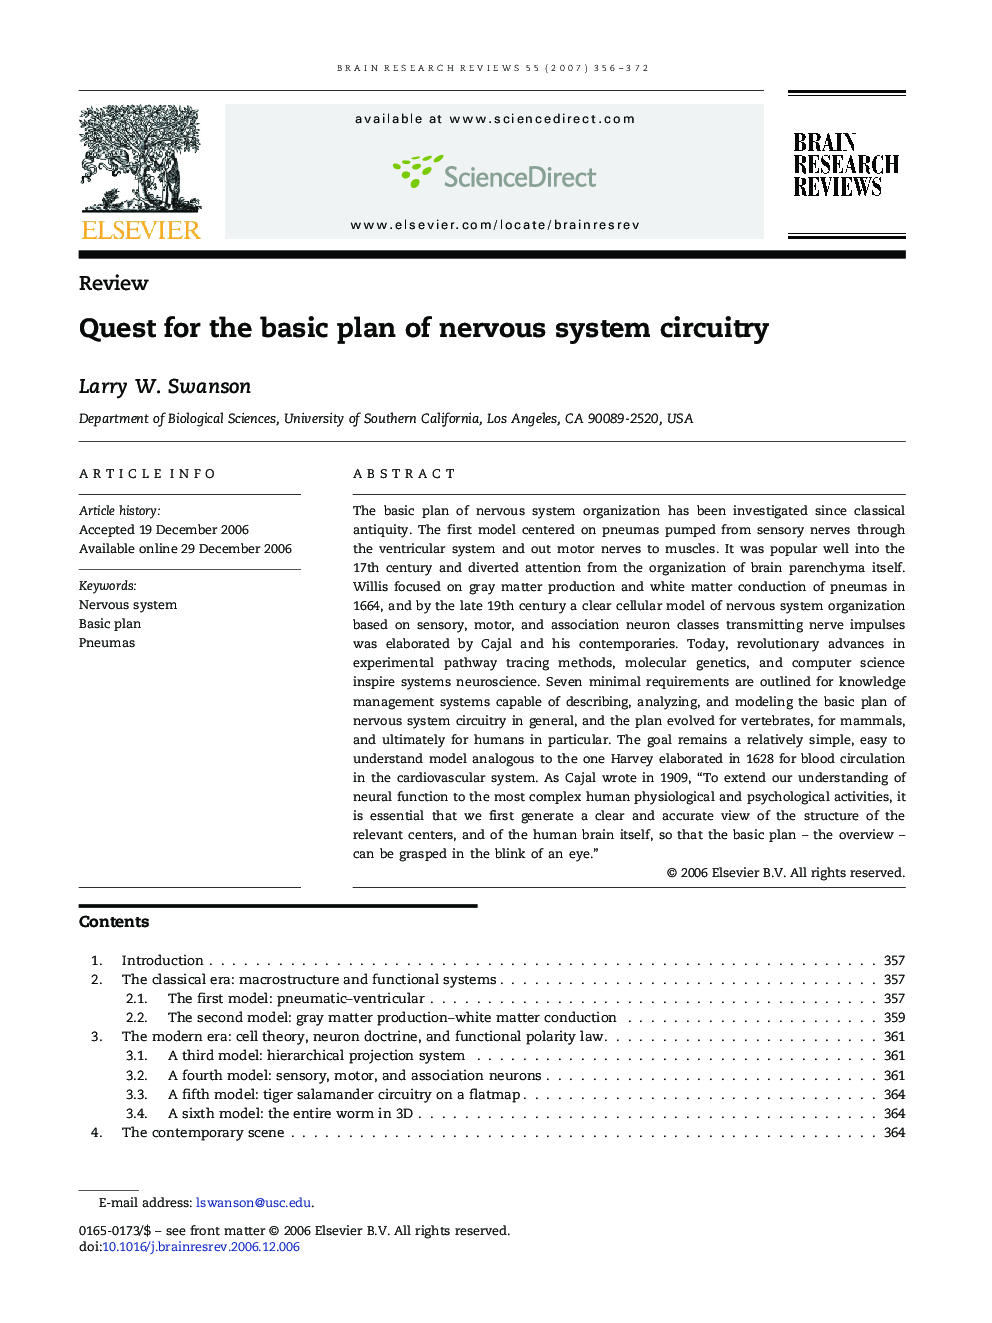 Quest for the basic plan of nervous system circuitry